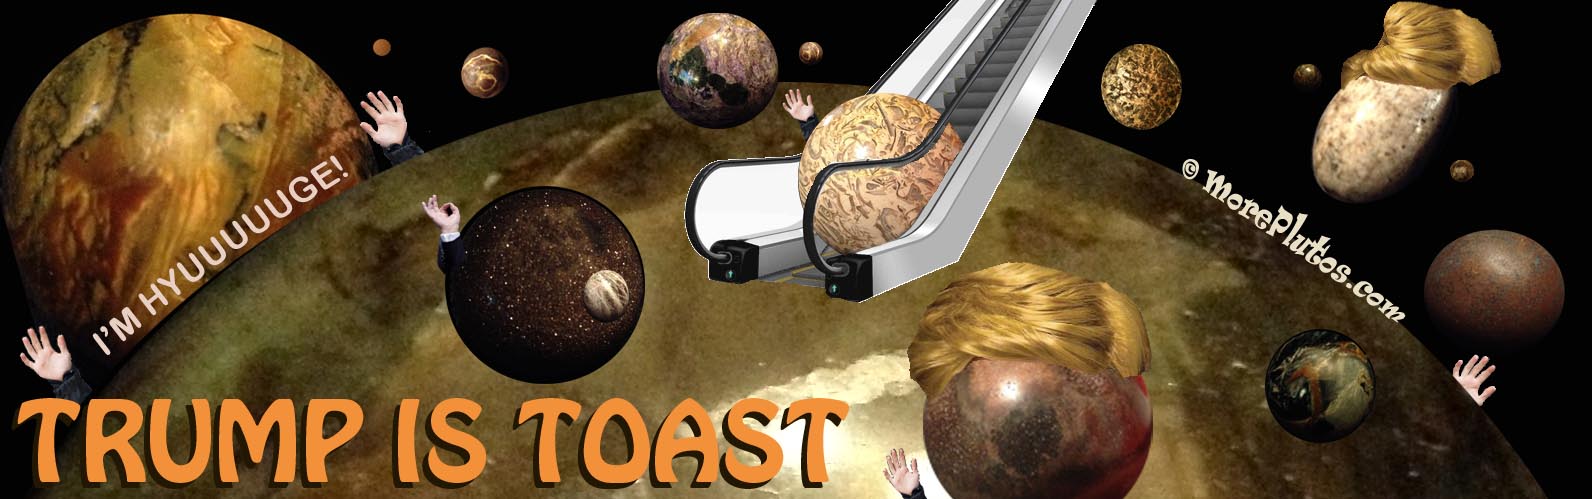 More Plutos Plog: TRUMP IS TOAST - The Dwarf Planets Have a Ball Spoofing Donald Trump